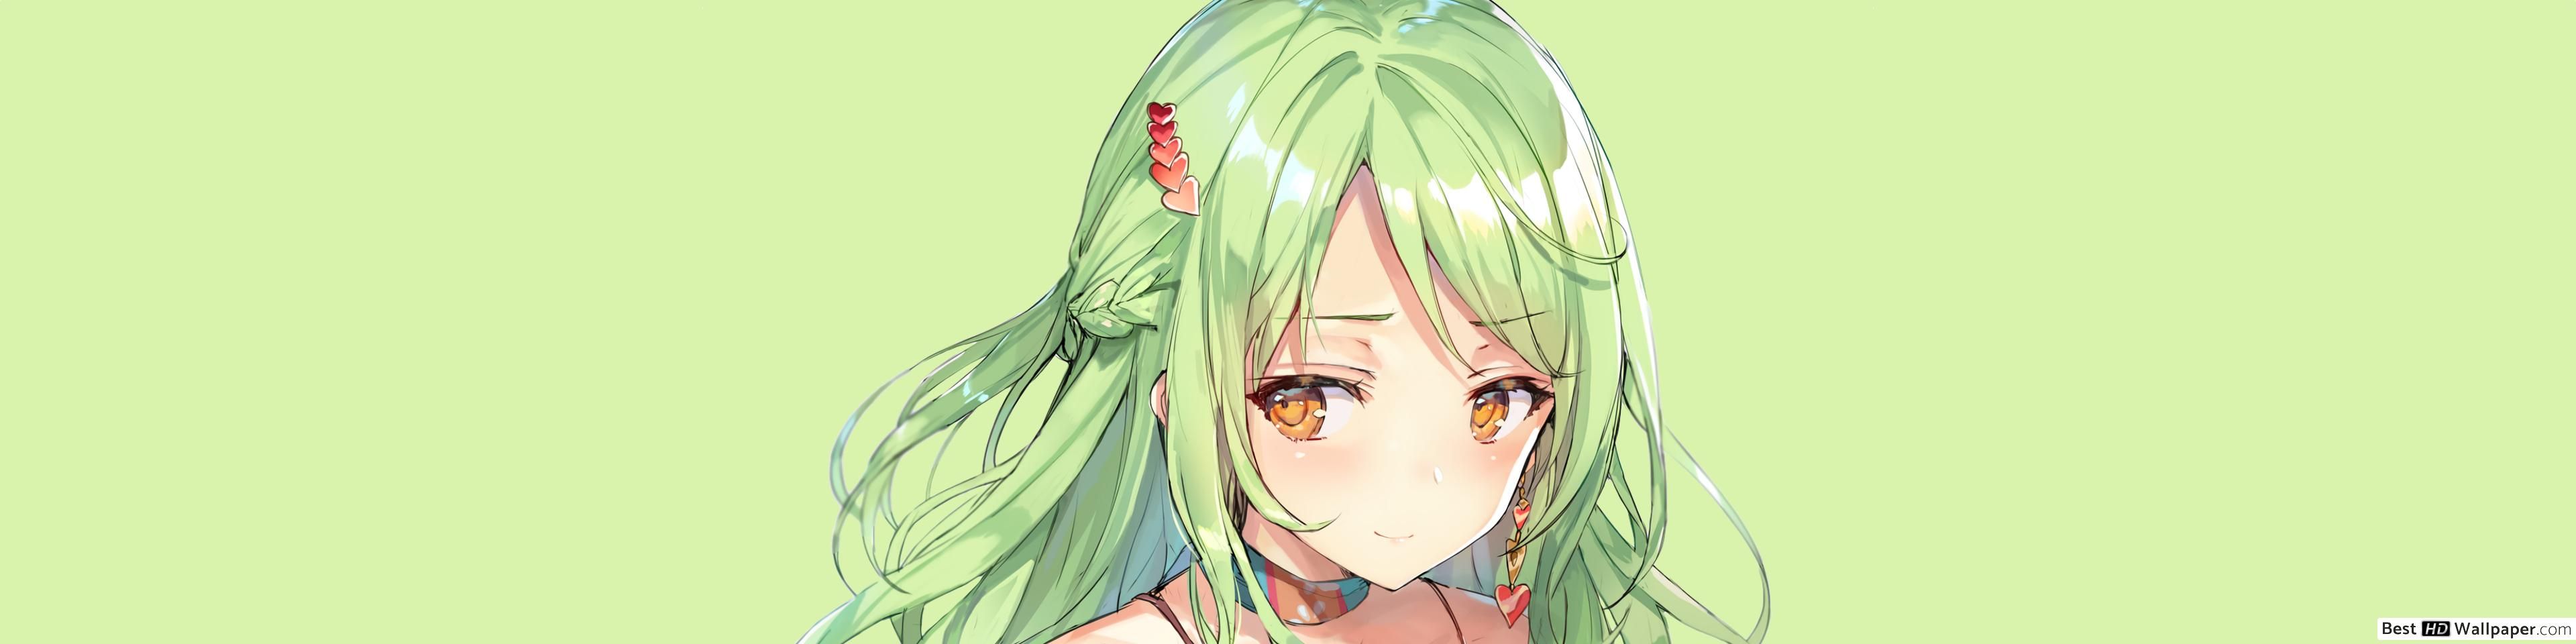 Shy green haired anime girl HD wallpapers download